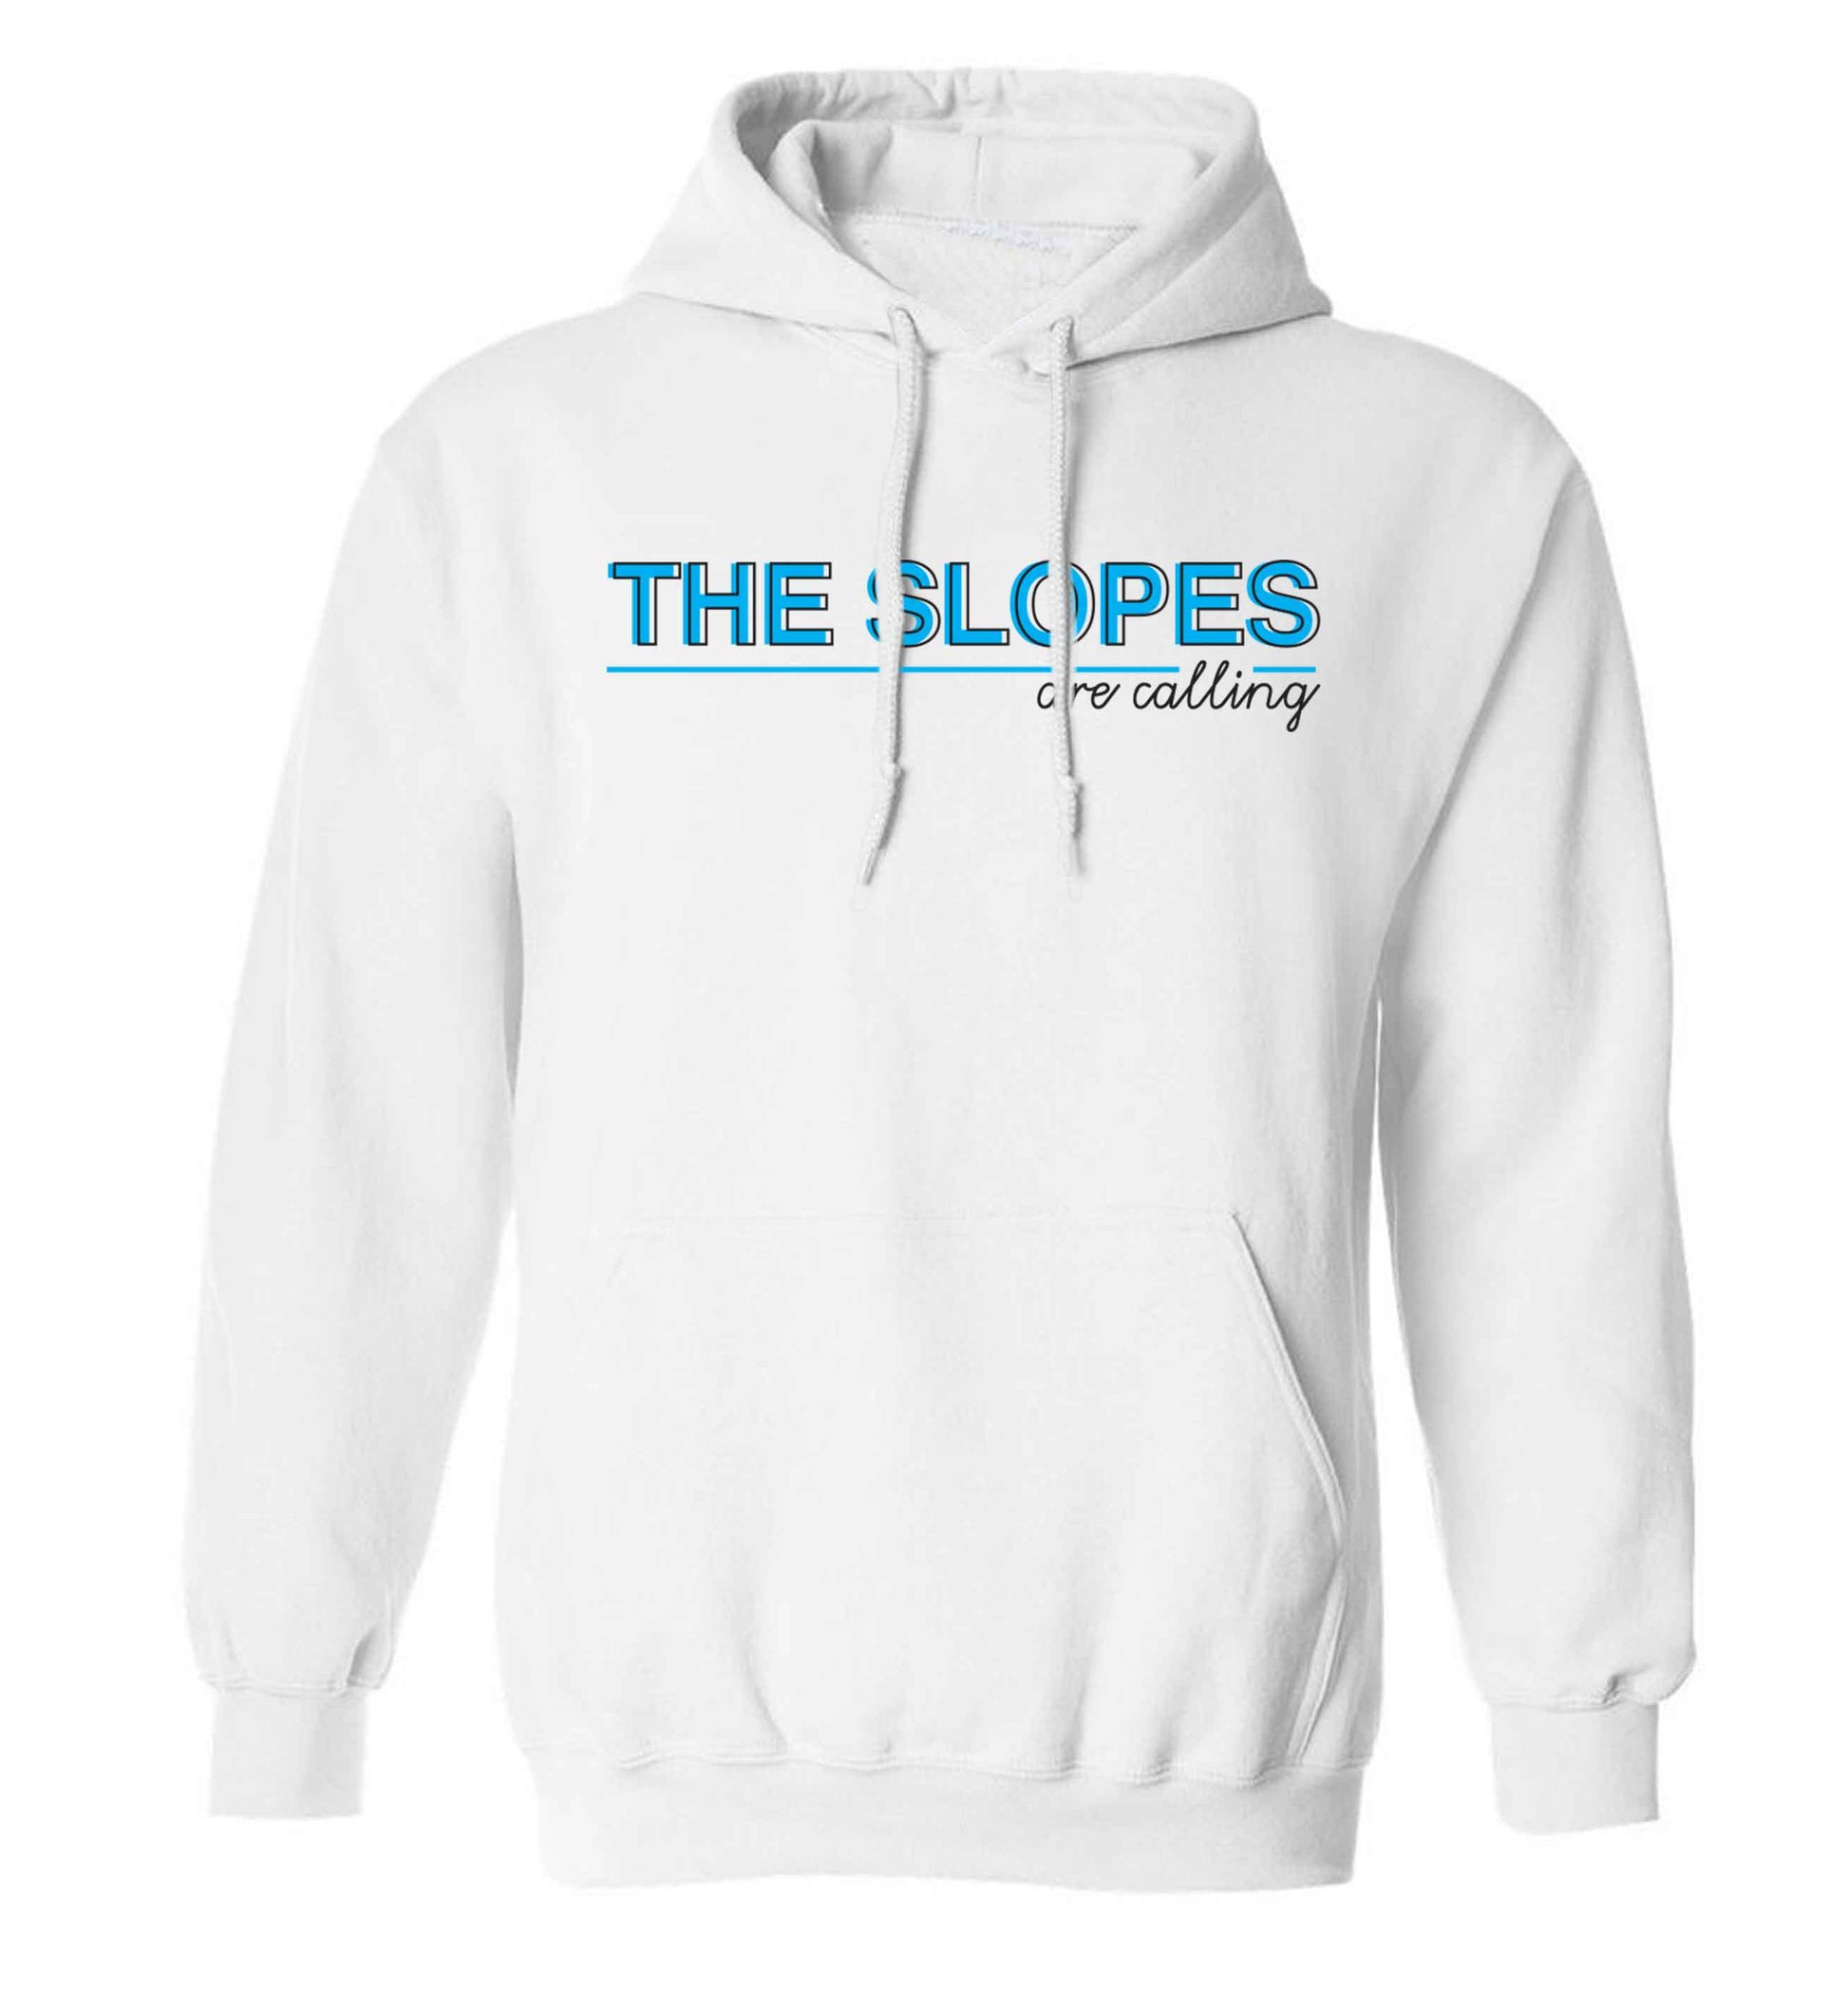 The slopes are calling adults unisex white hoodie 2XL